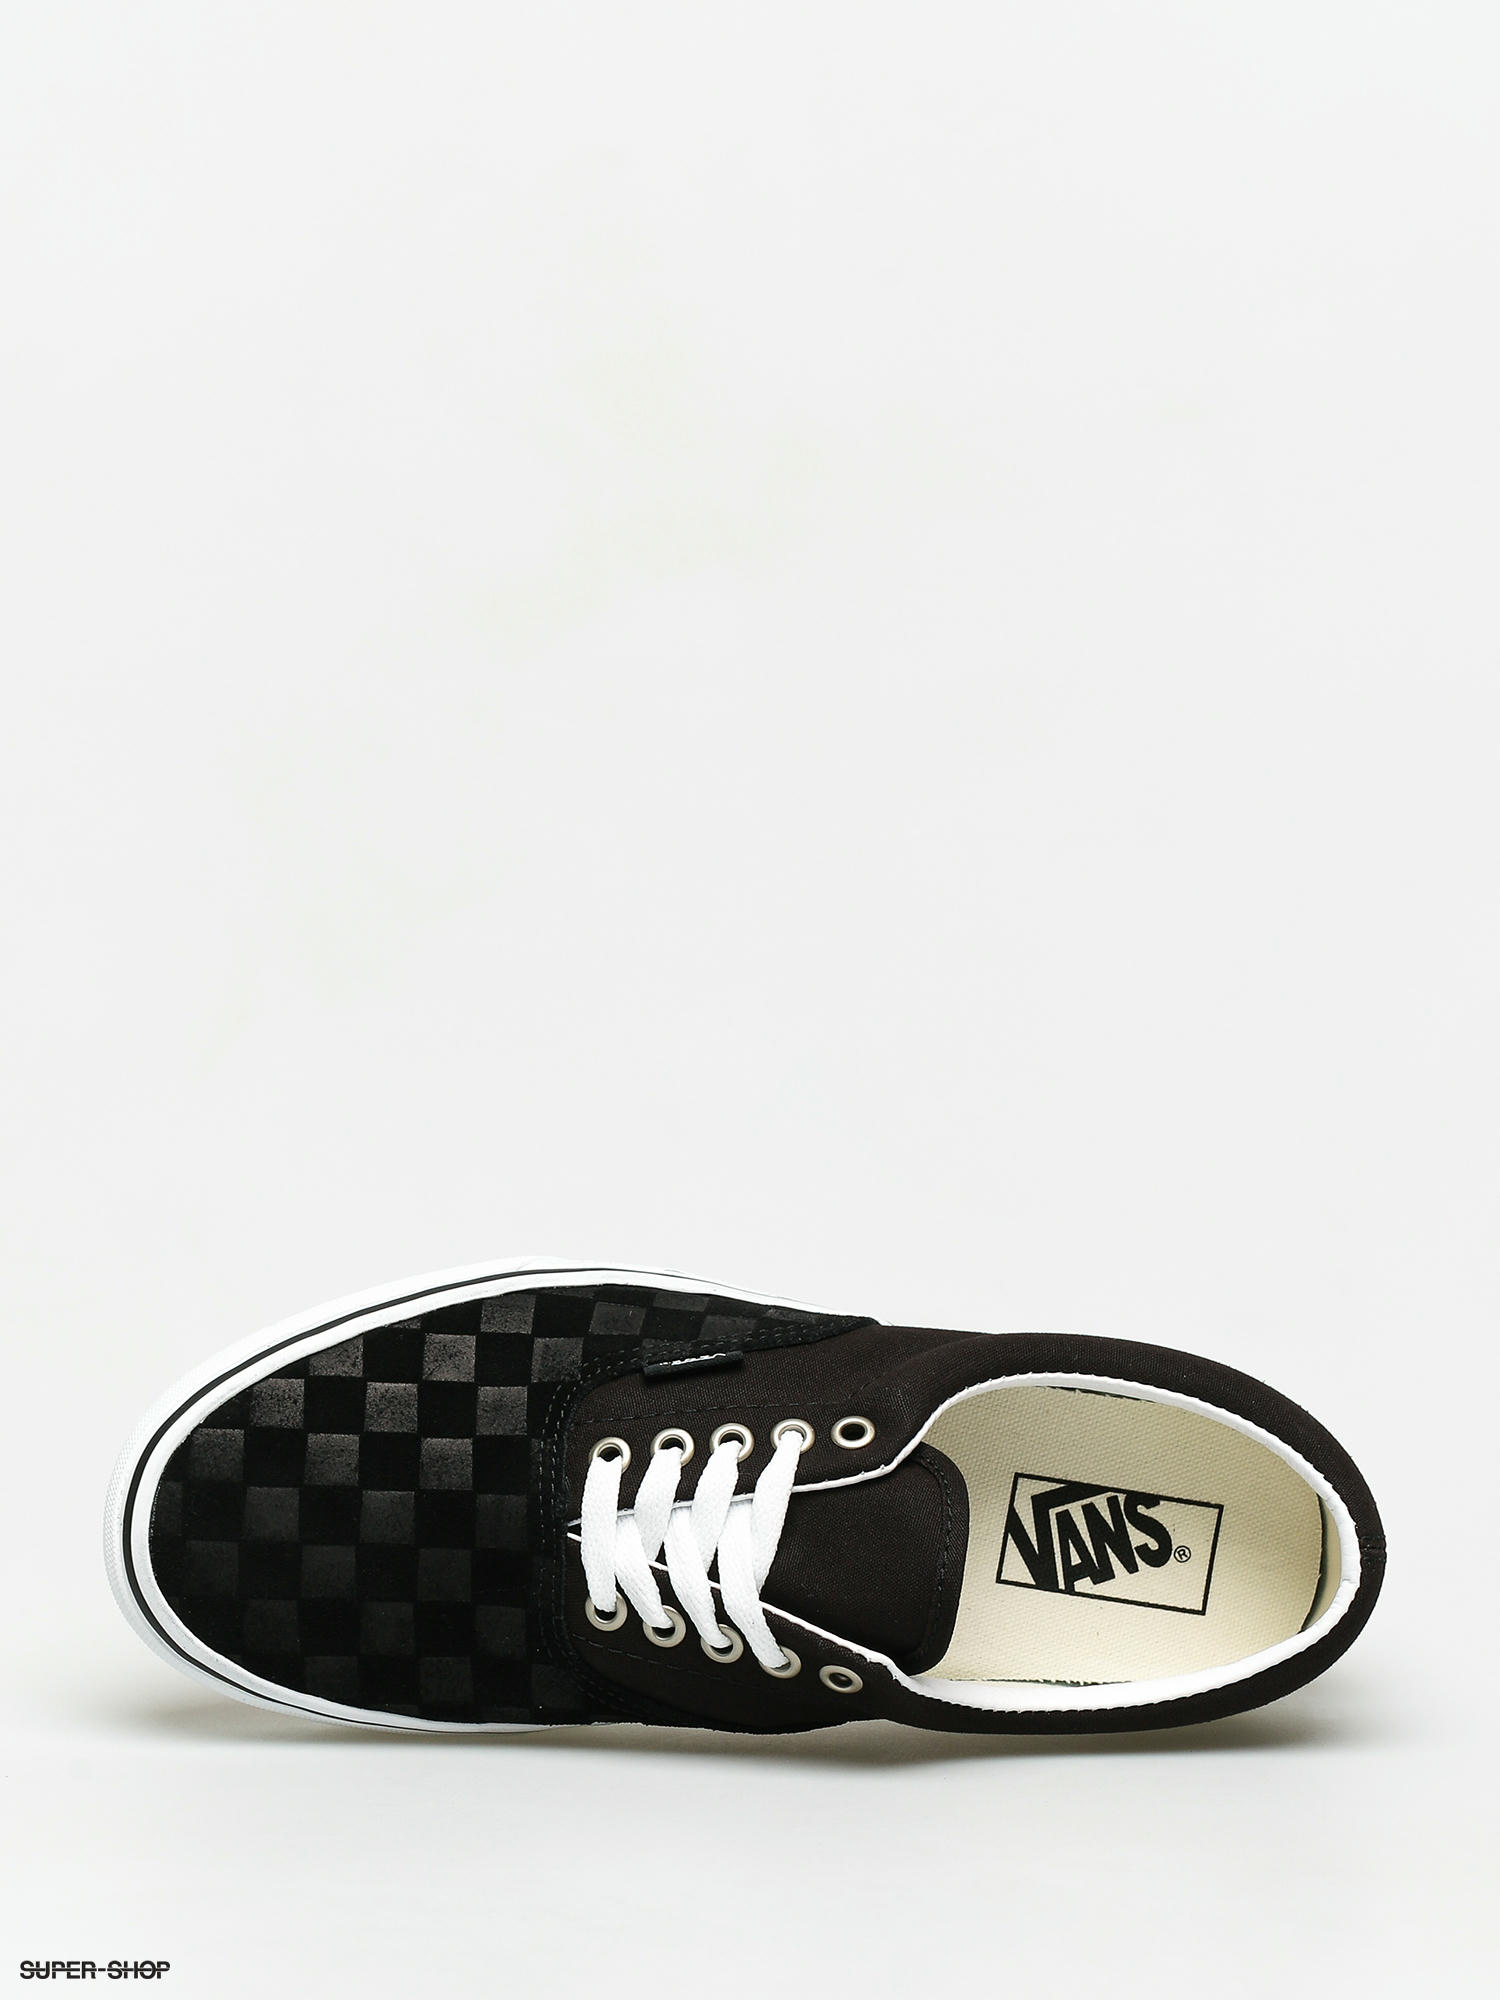 difference between vans authentic and era